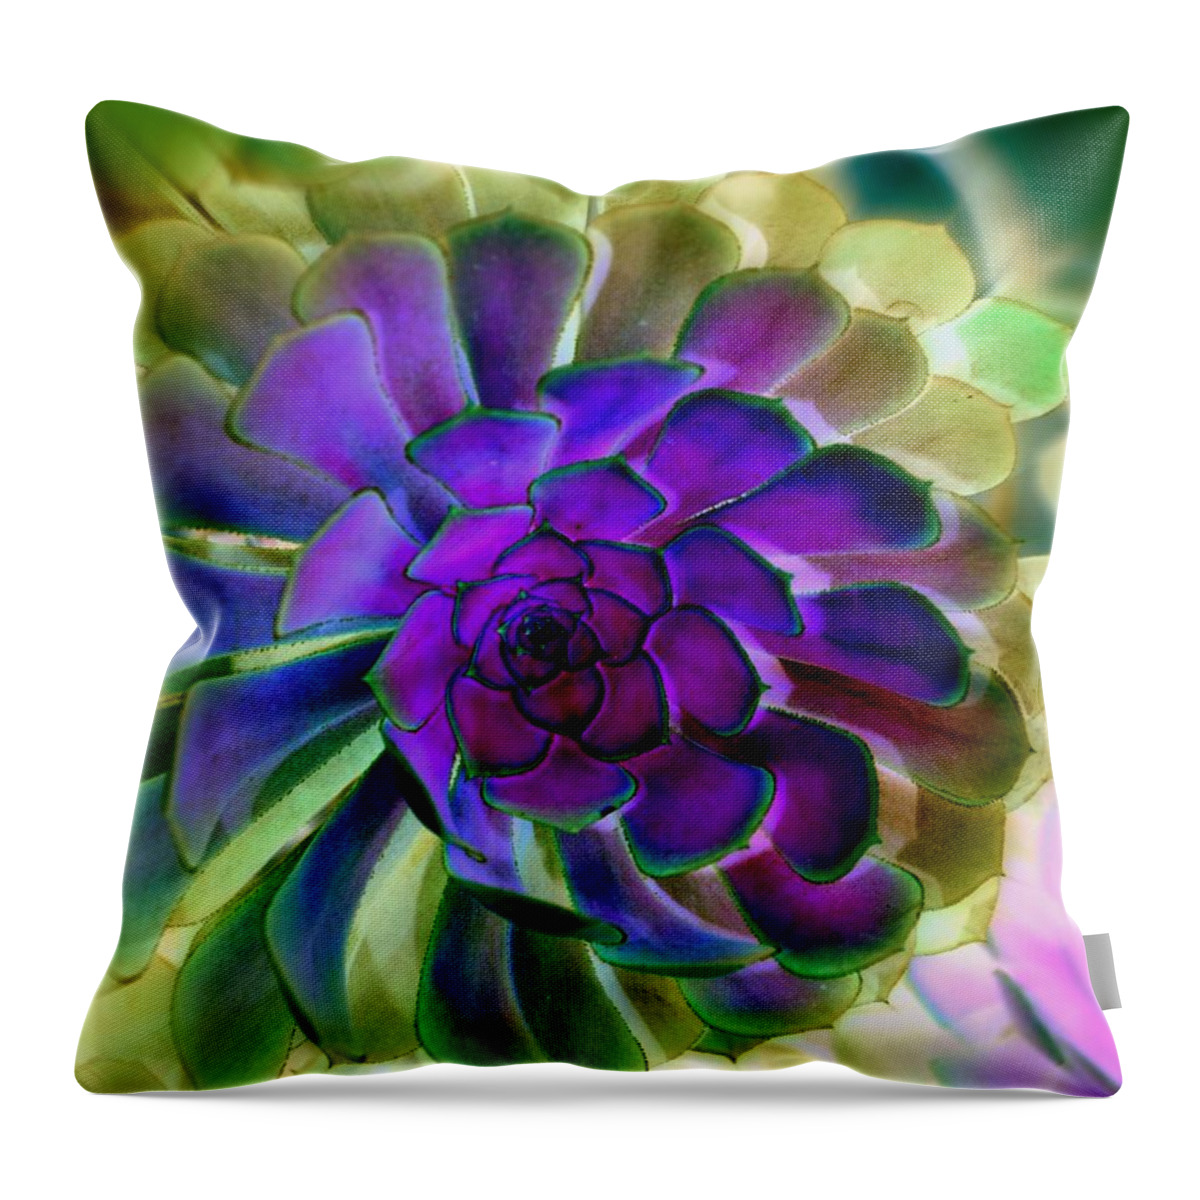 Succulent Throw Pillow featuring the photograph Succulent Transformation by Antonia Citrino